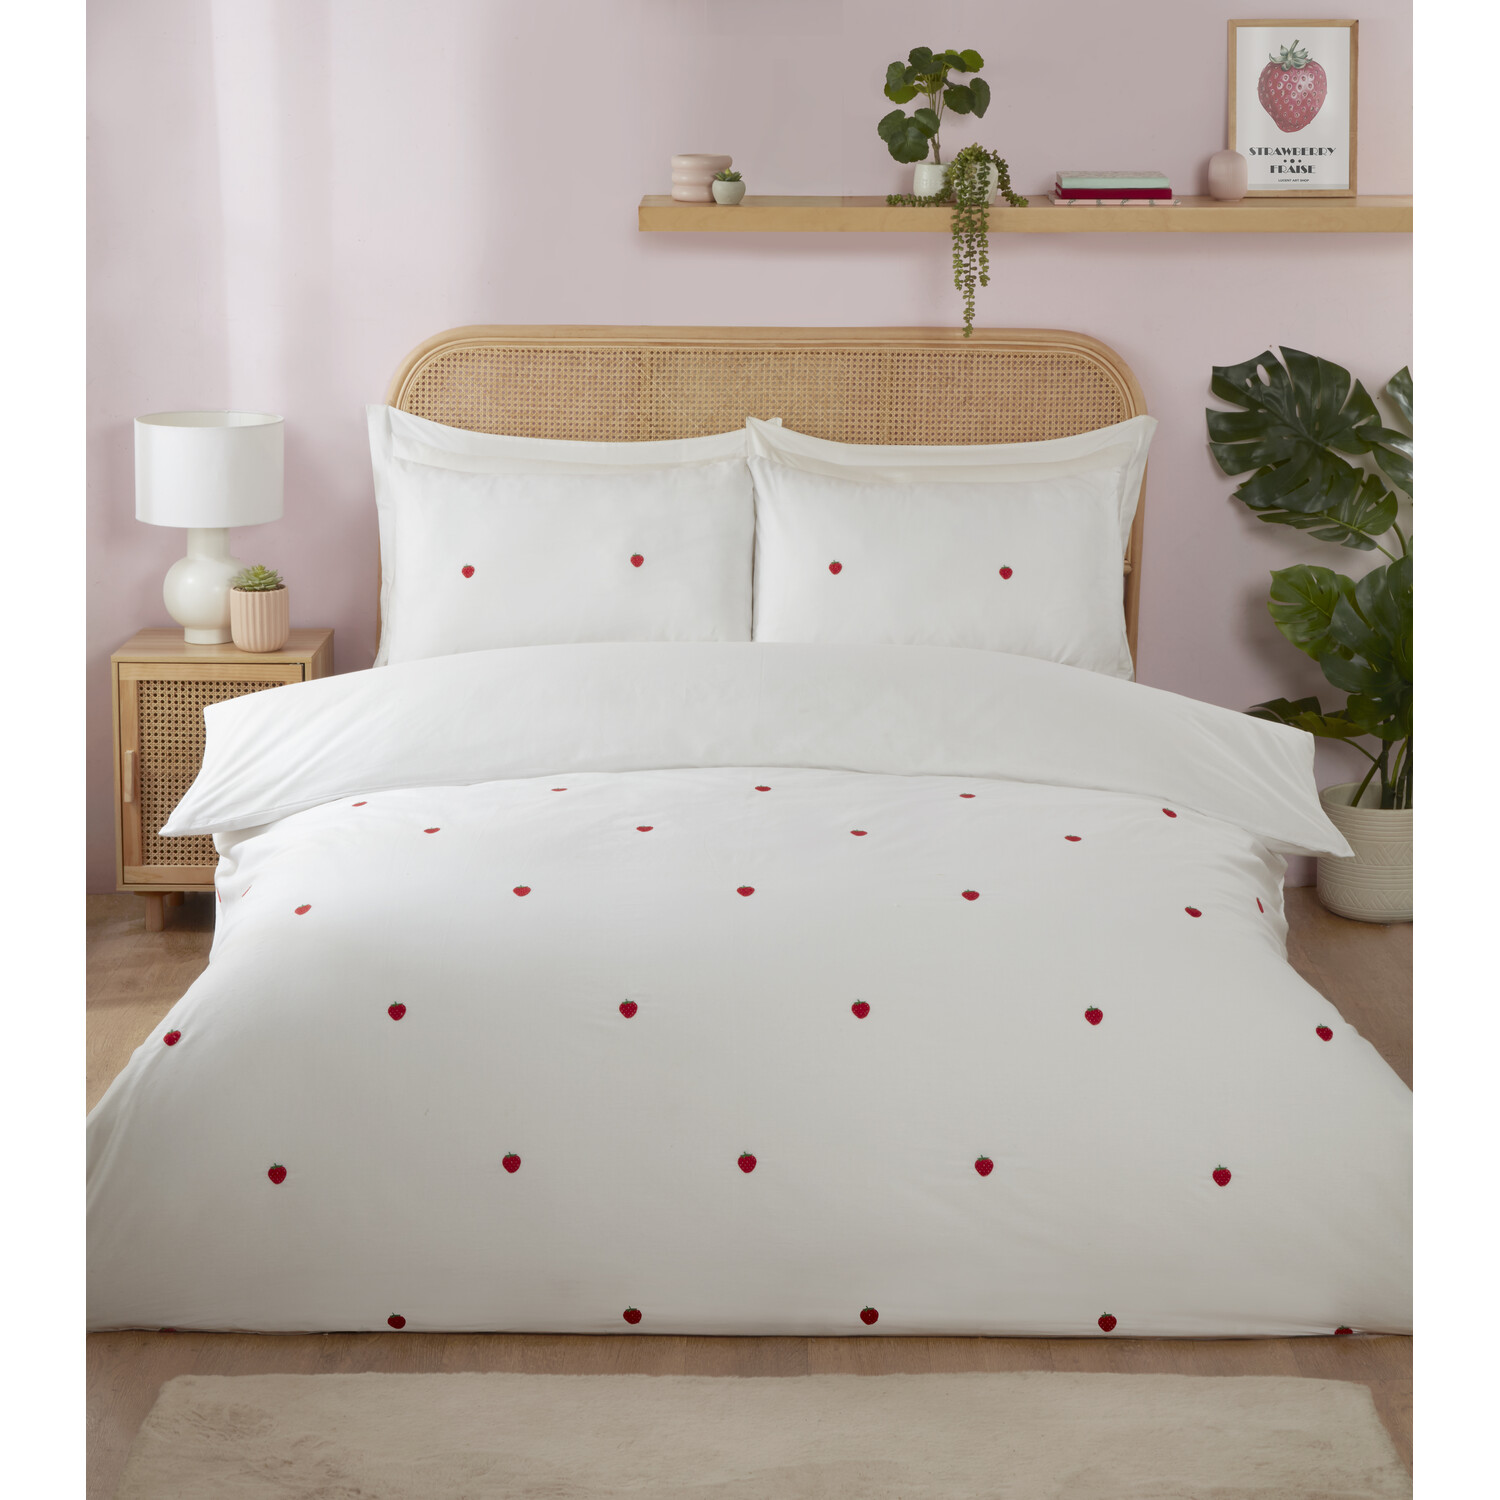 Strawberry Embroidered Duvet Cover and Pillowcase Set - White / King Image 1